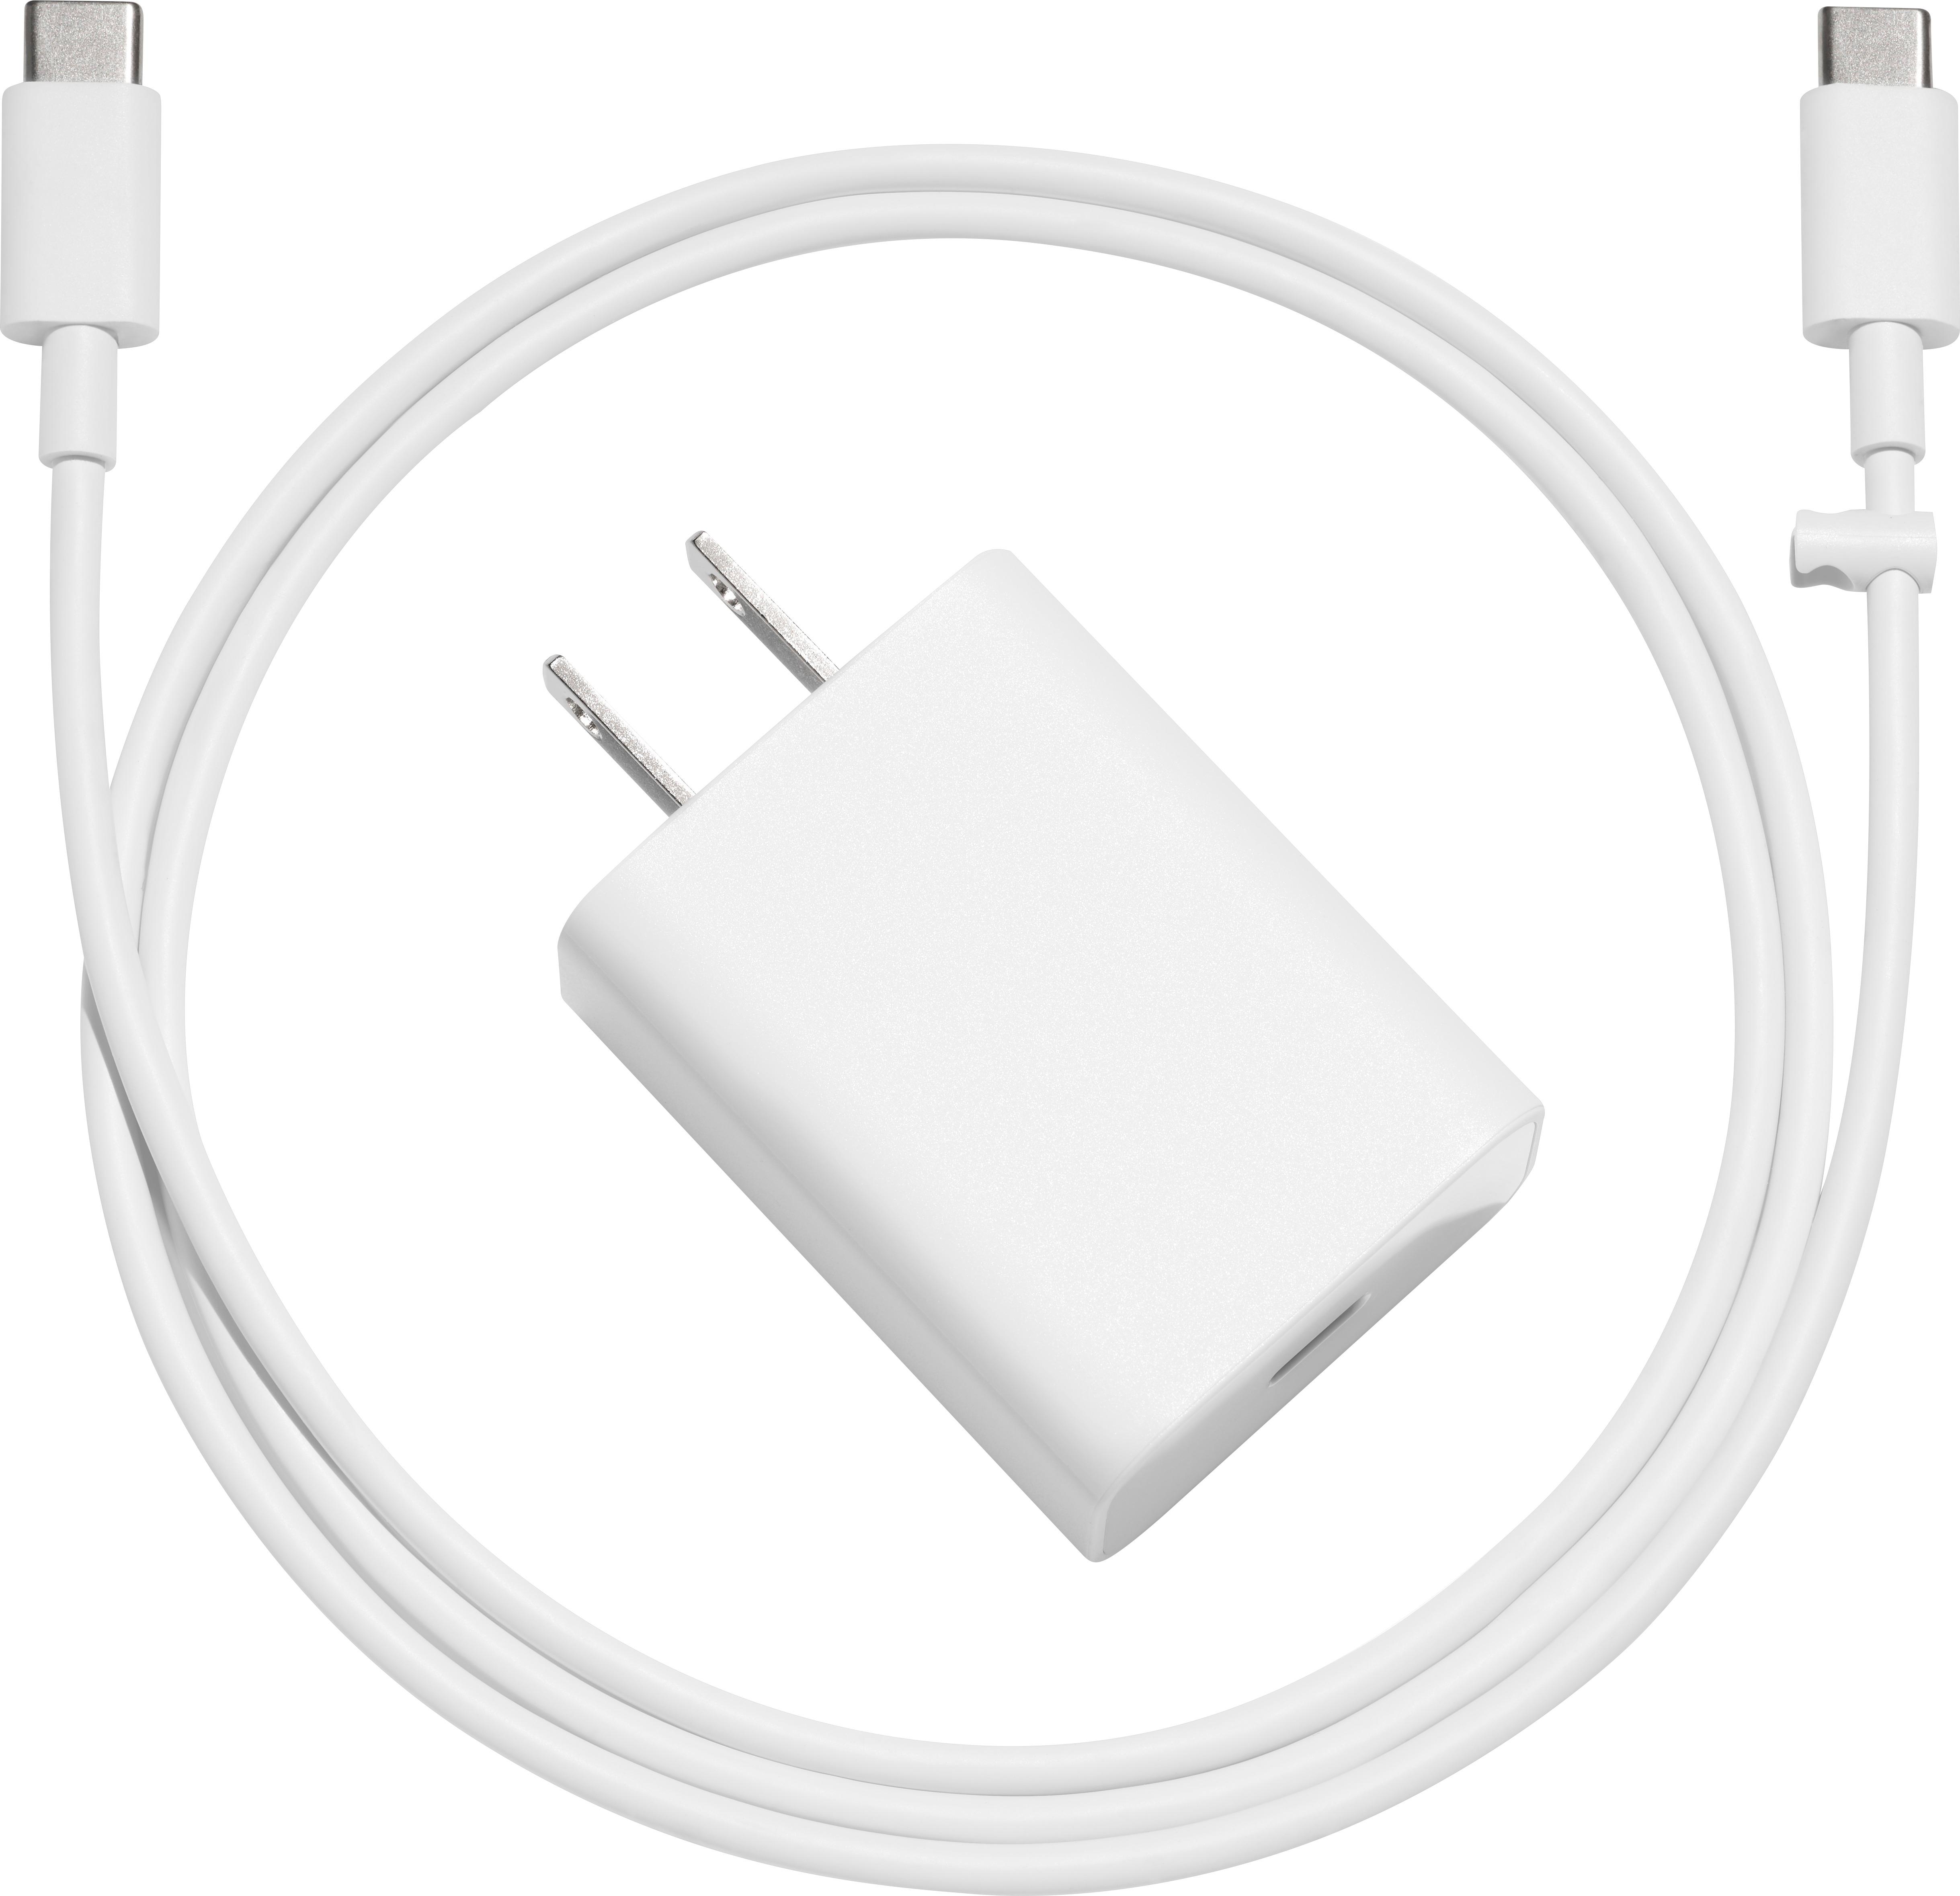 Google GA00193-US USB Type-C Cable & Wall Charger for Pixel, XL, Pixel 2,  XL, 3.29 ft, White 